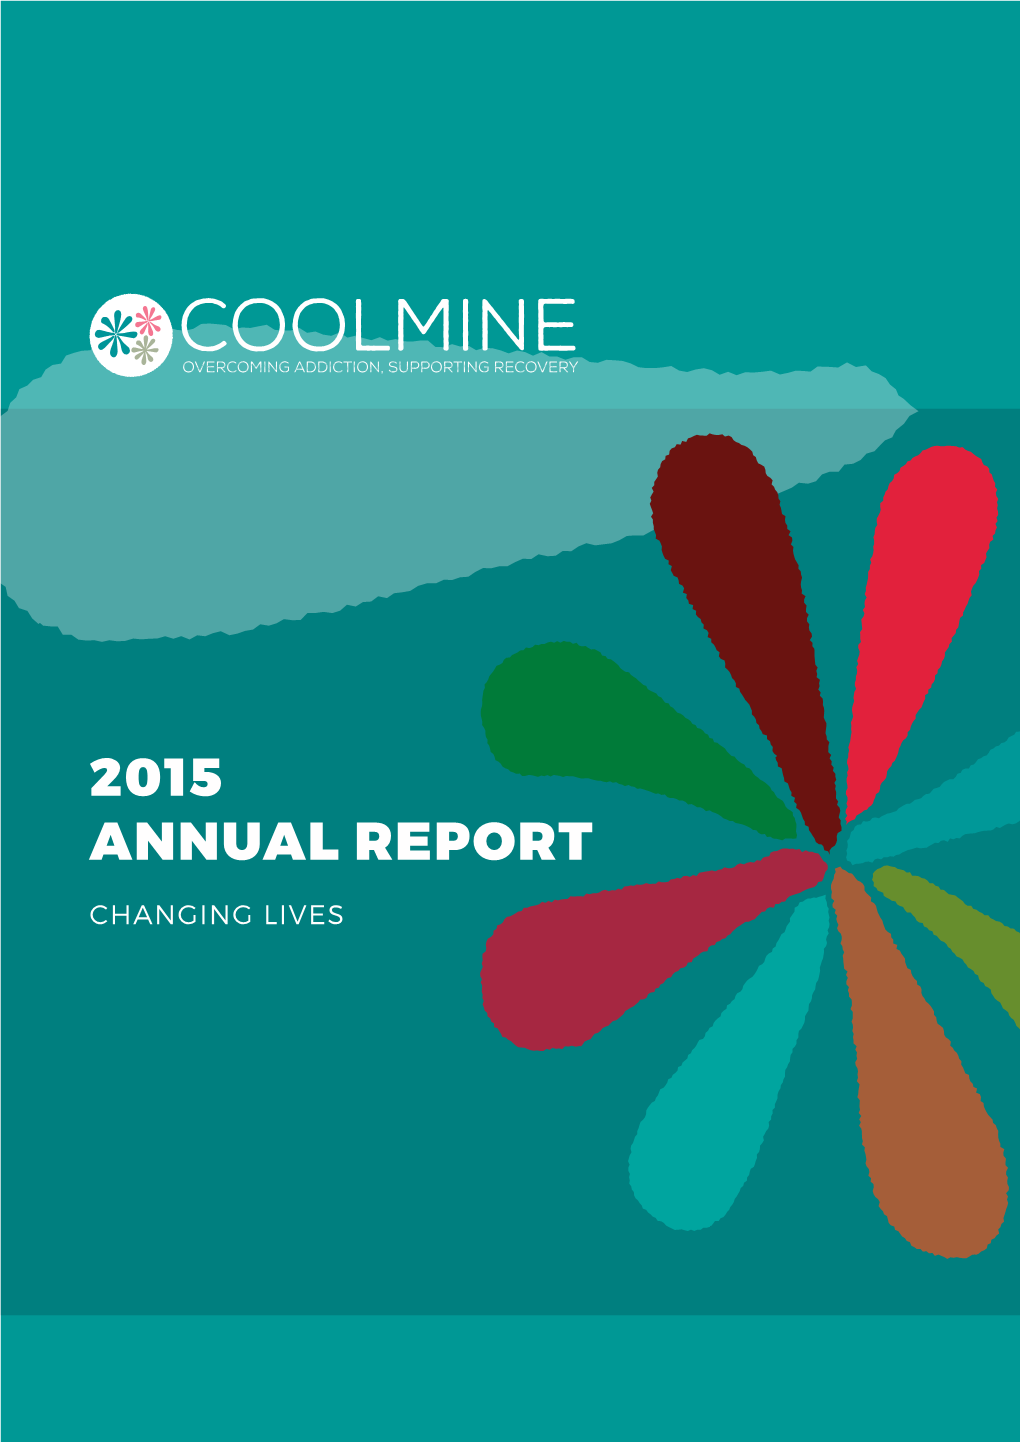 Coolmine Annual Report 2015